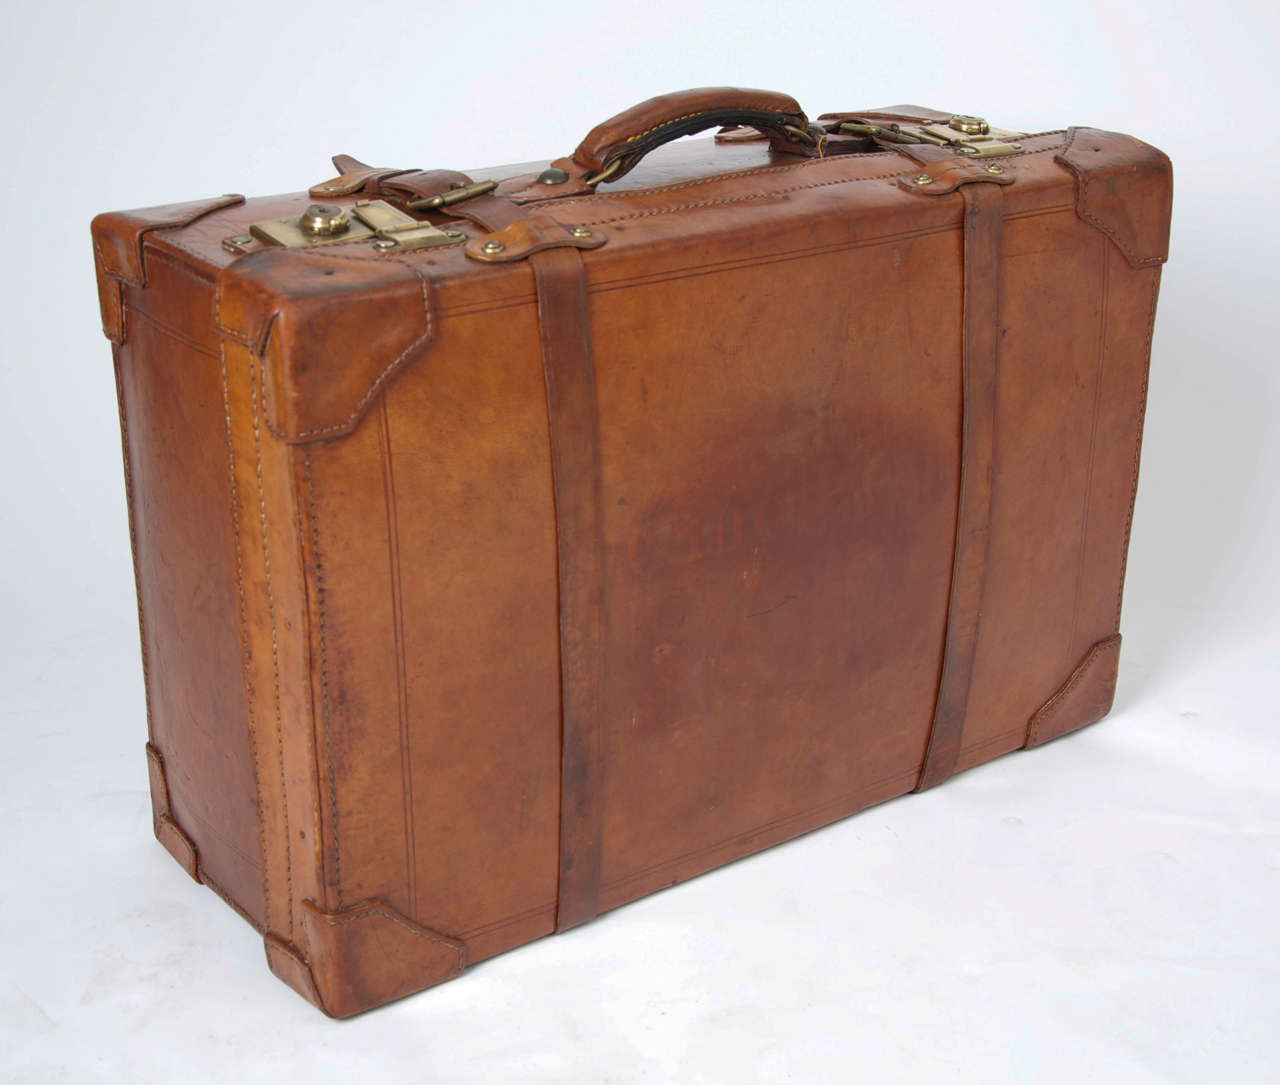 British 19th C. Leather SUITCASE, English, Very High Quality